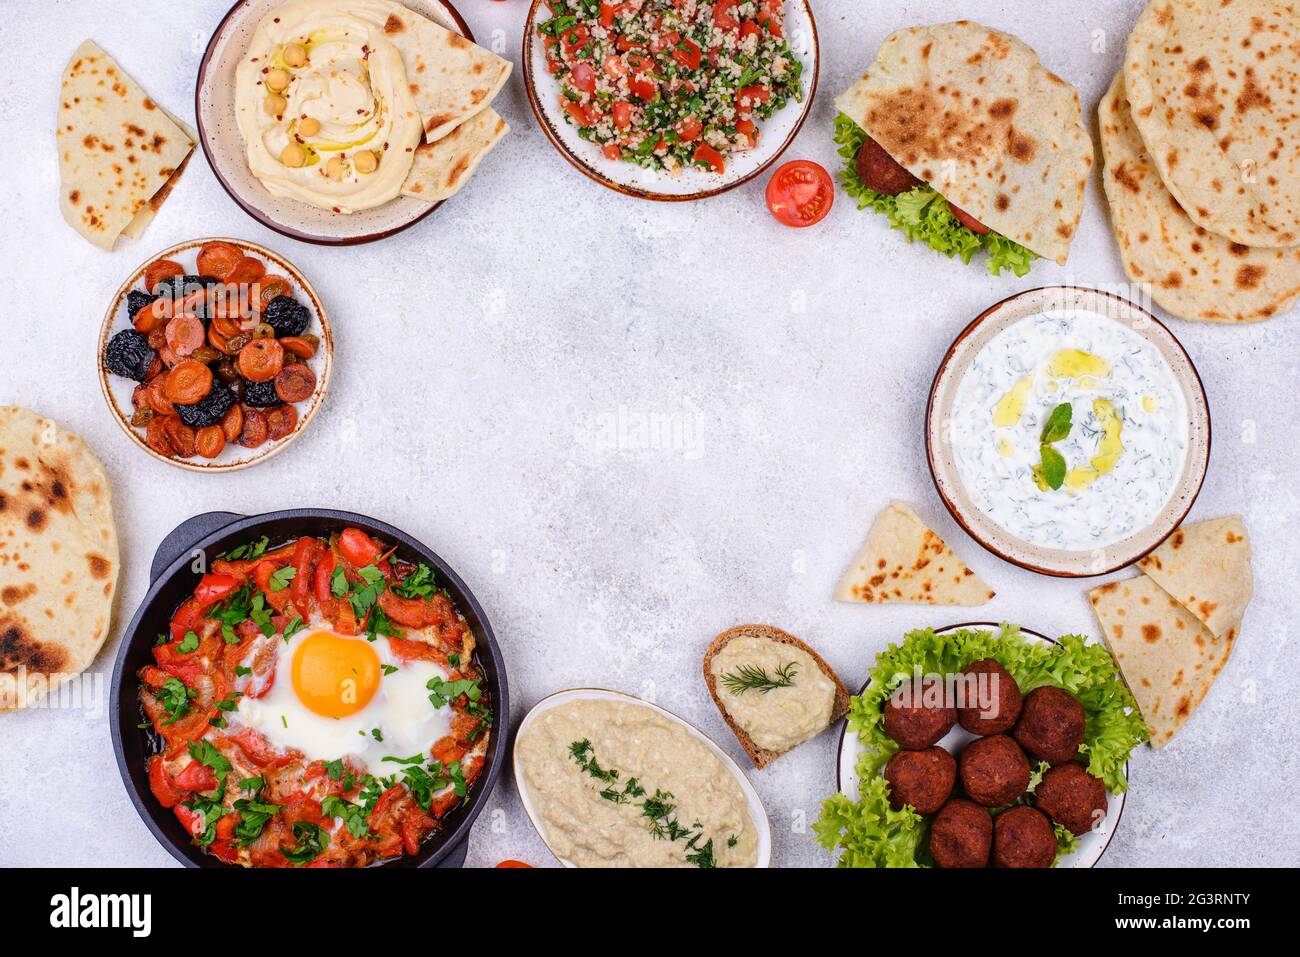 Traditional Jewish, Israeli and middle Eastern food Stock Photo